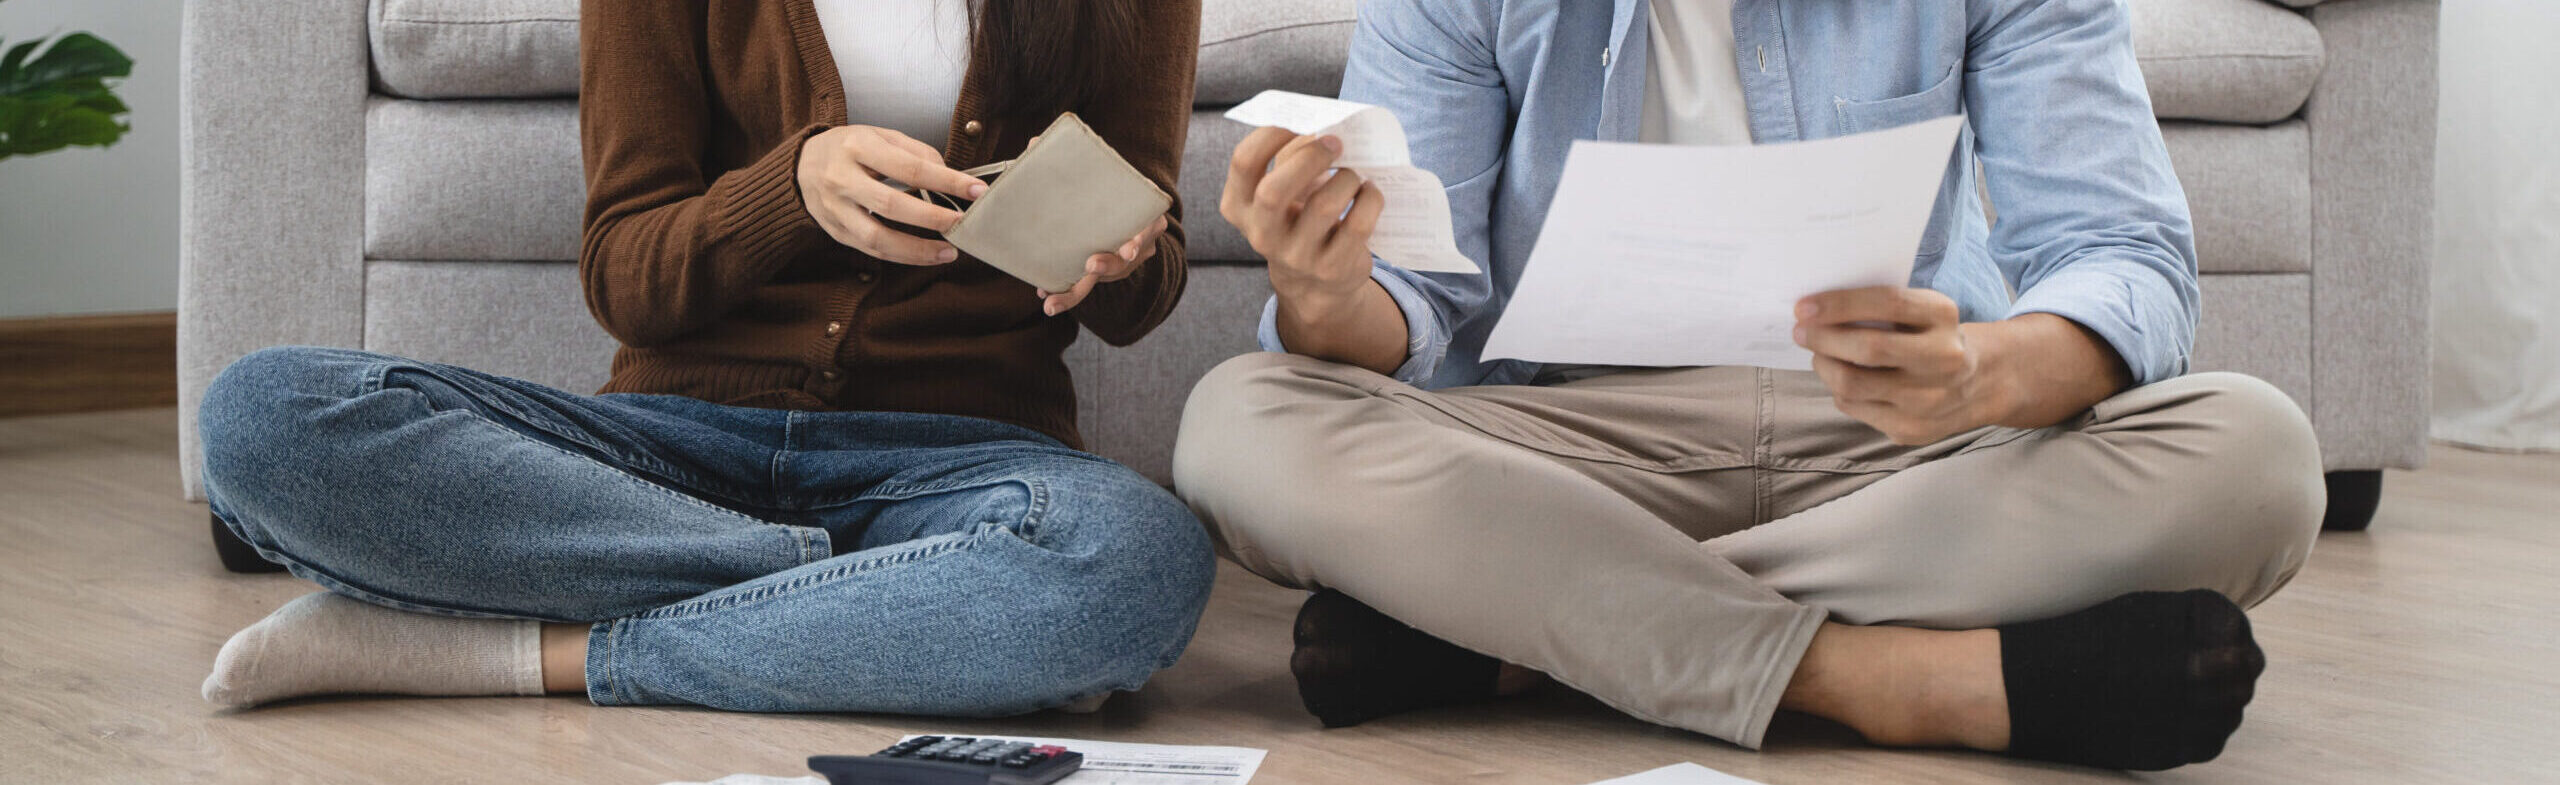 couple sitting on the floor with crossed legs, holding receipts and bills. Calculator on the floor.